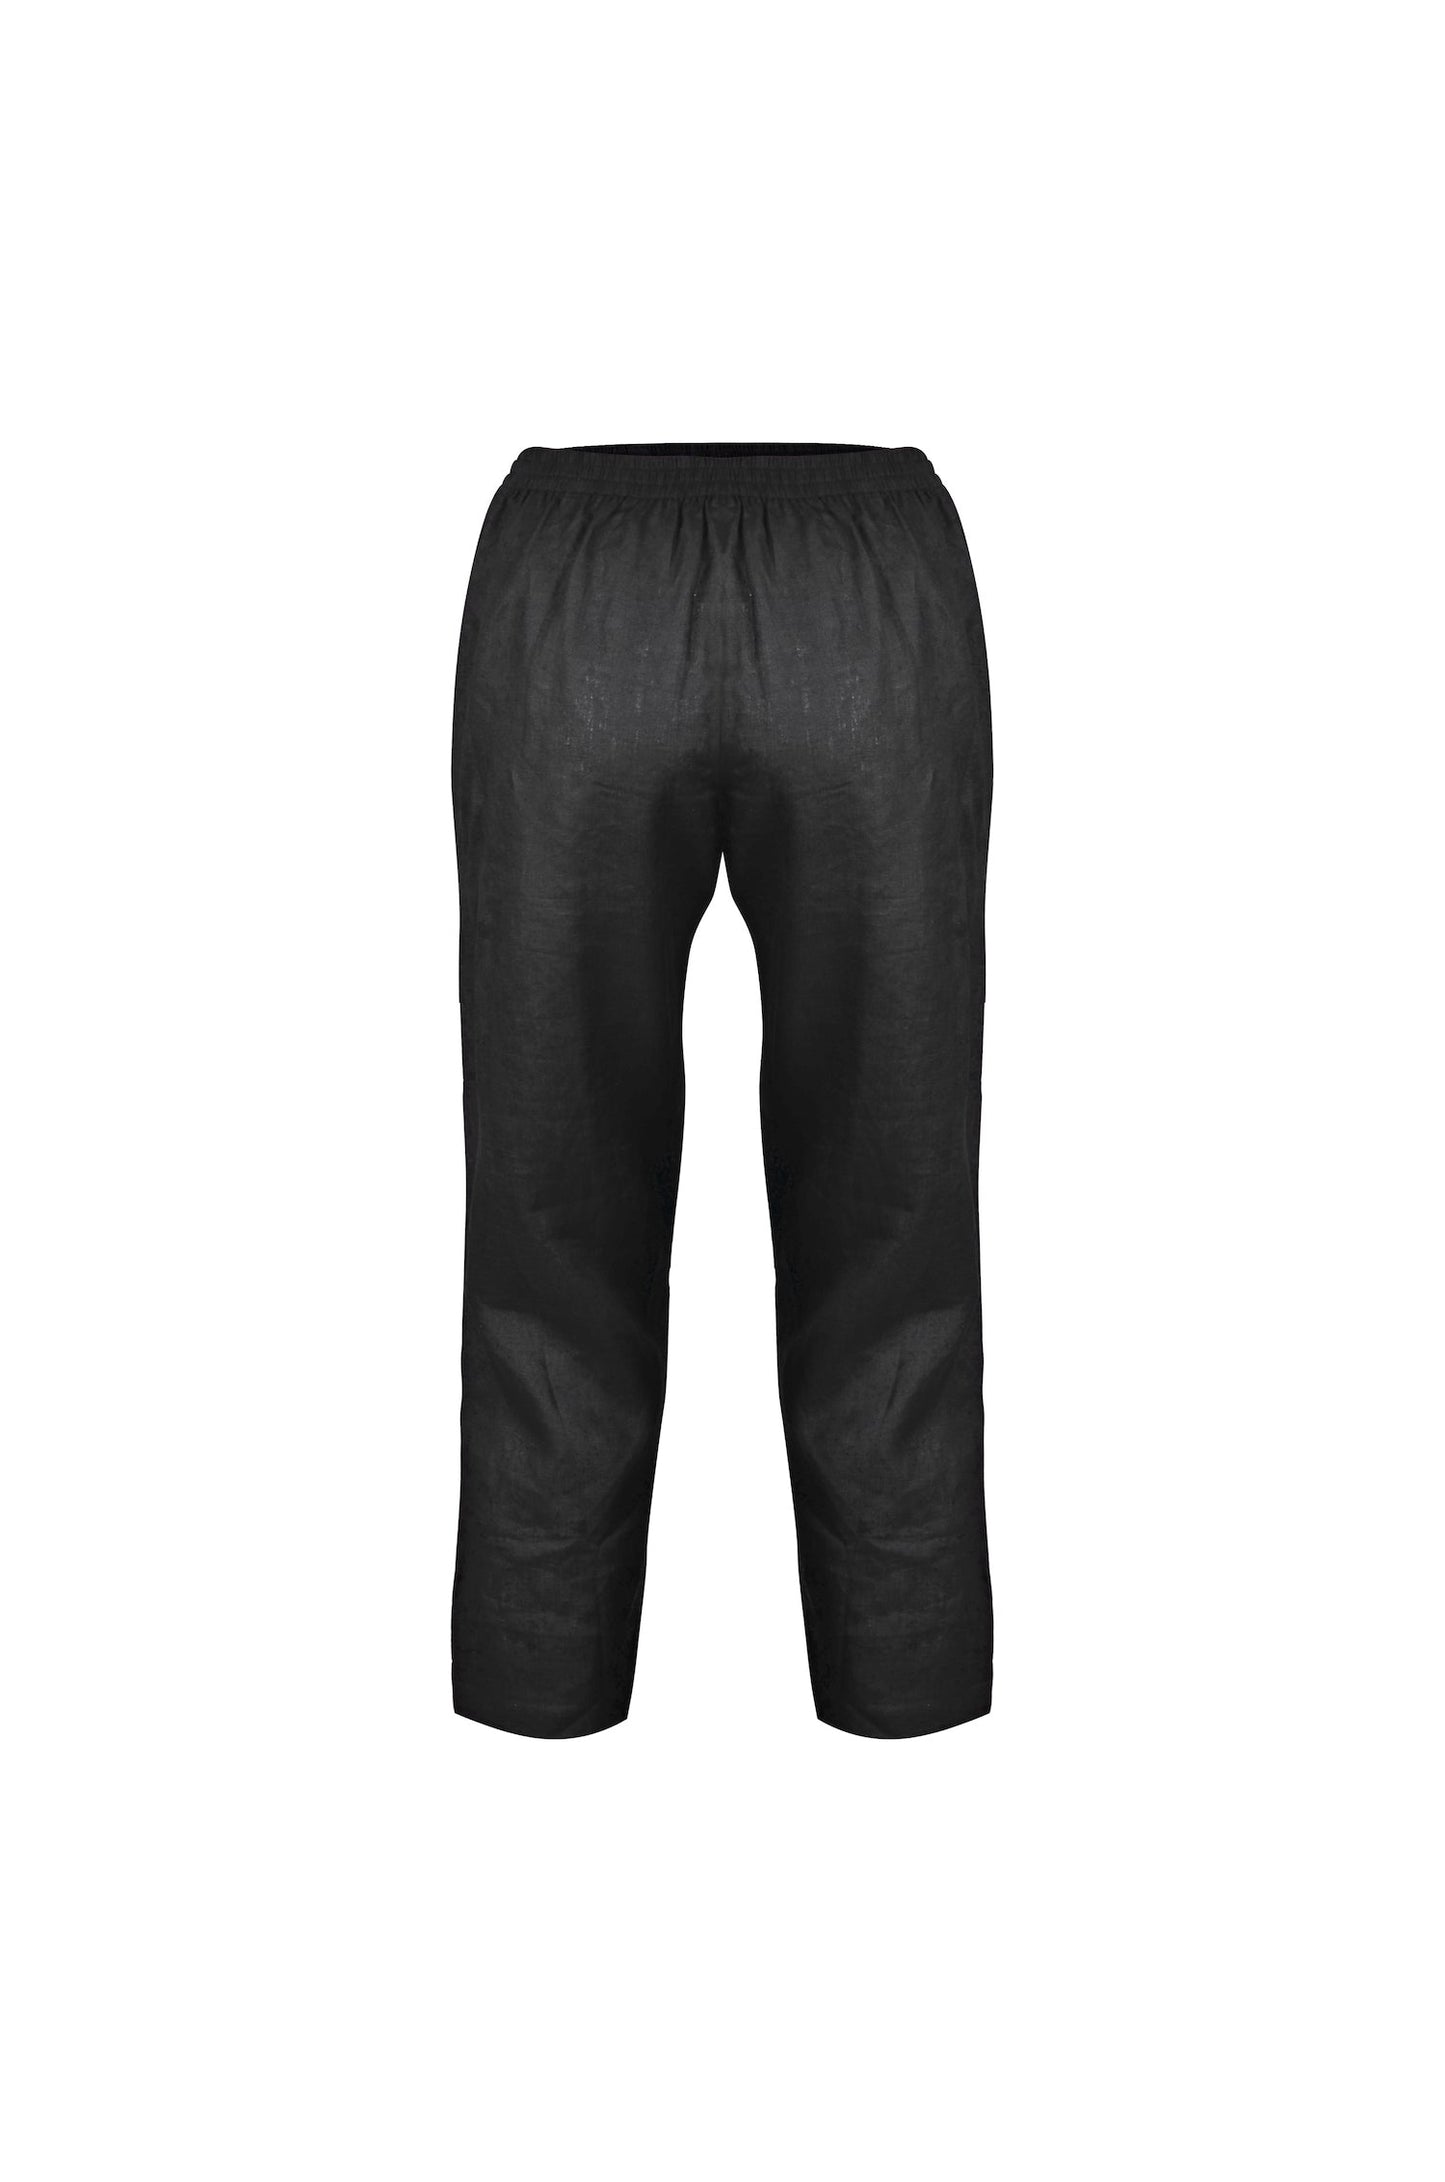 Cora Linen Pants (Midnight) - APPAREL THIS IS A LOVE SONG